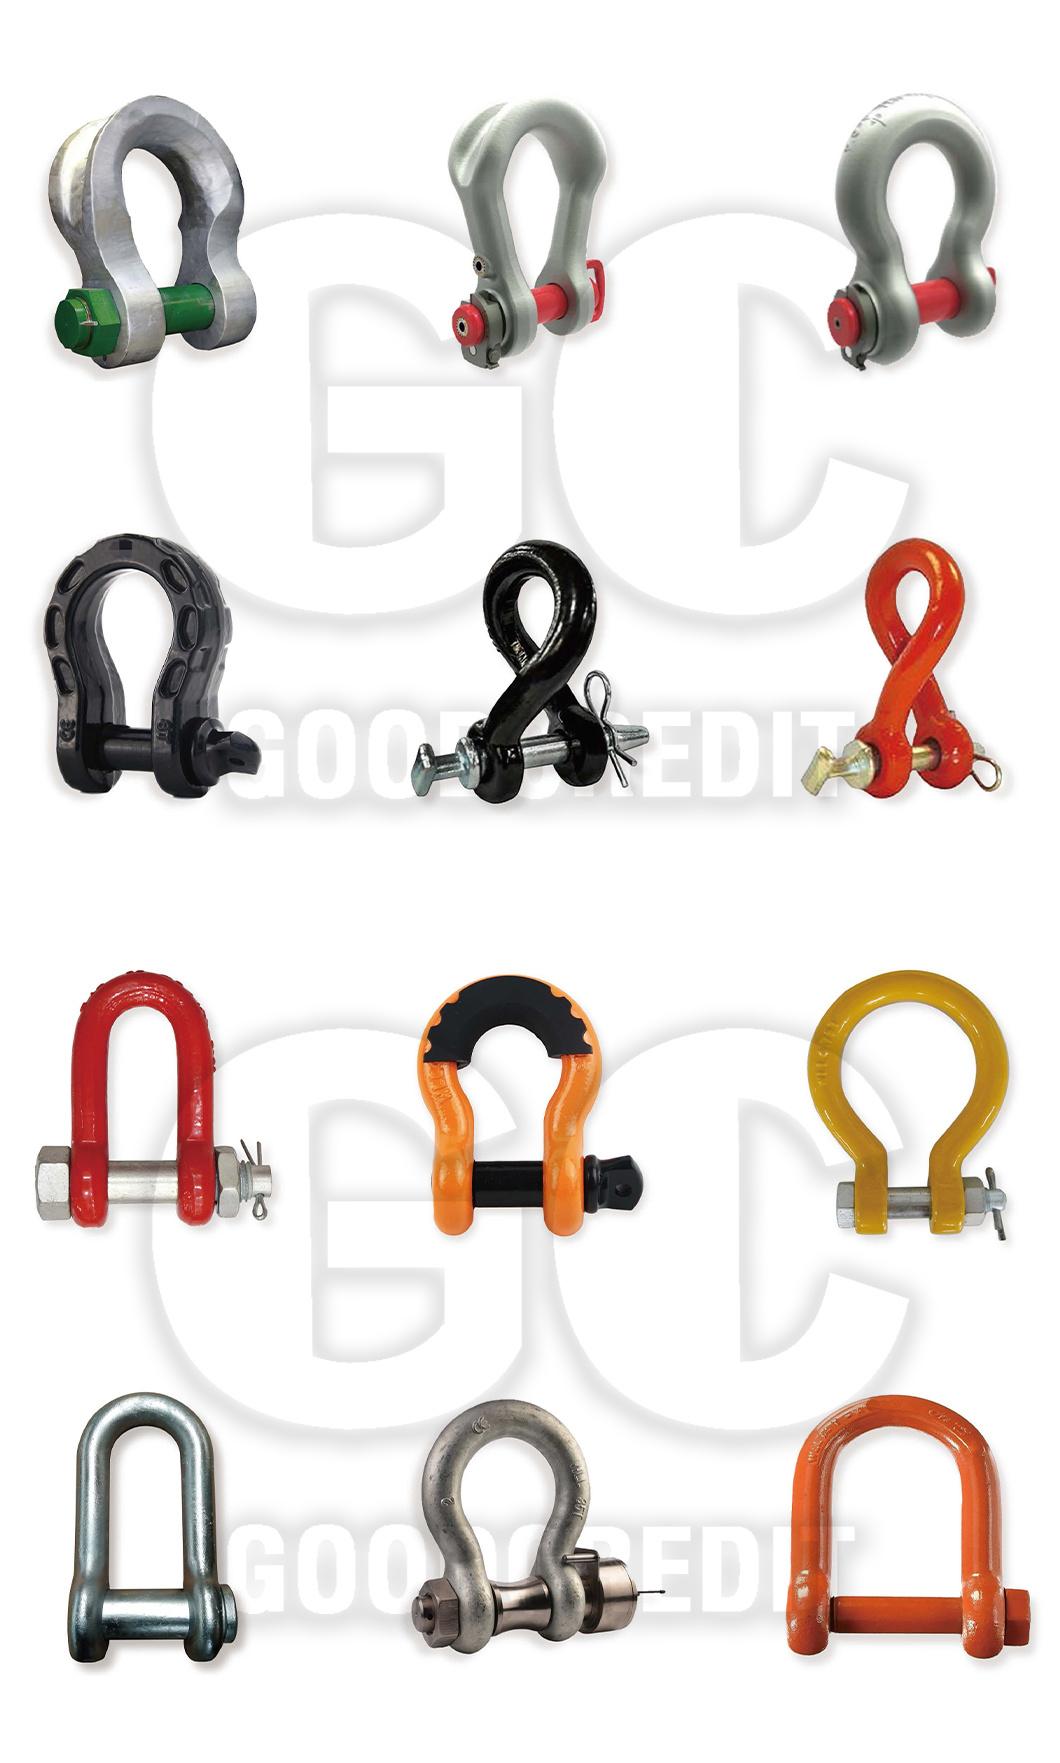 D Shape Shackle From Qingdao, China Quality Assurance and Good Price